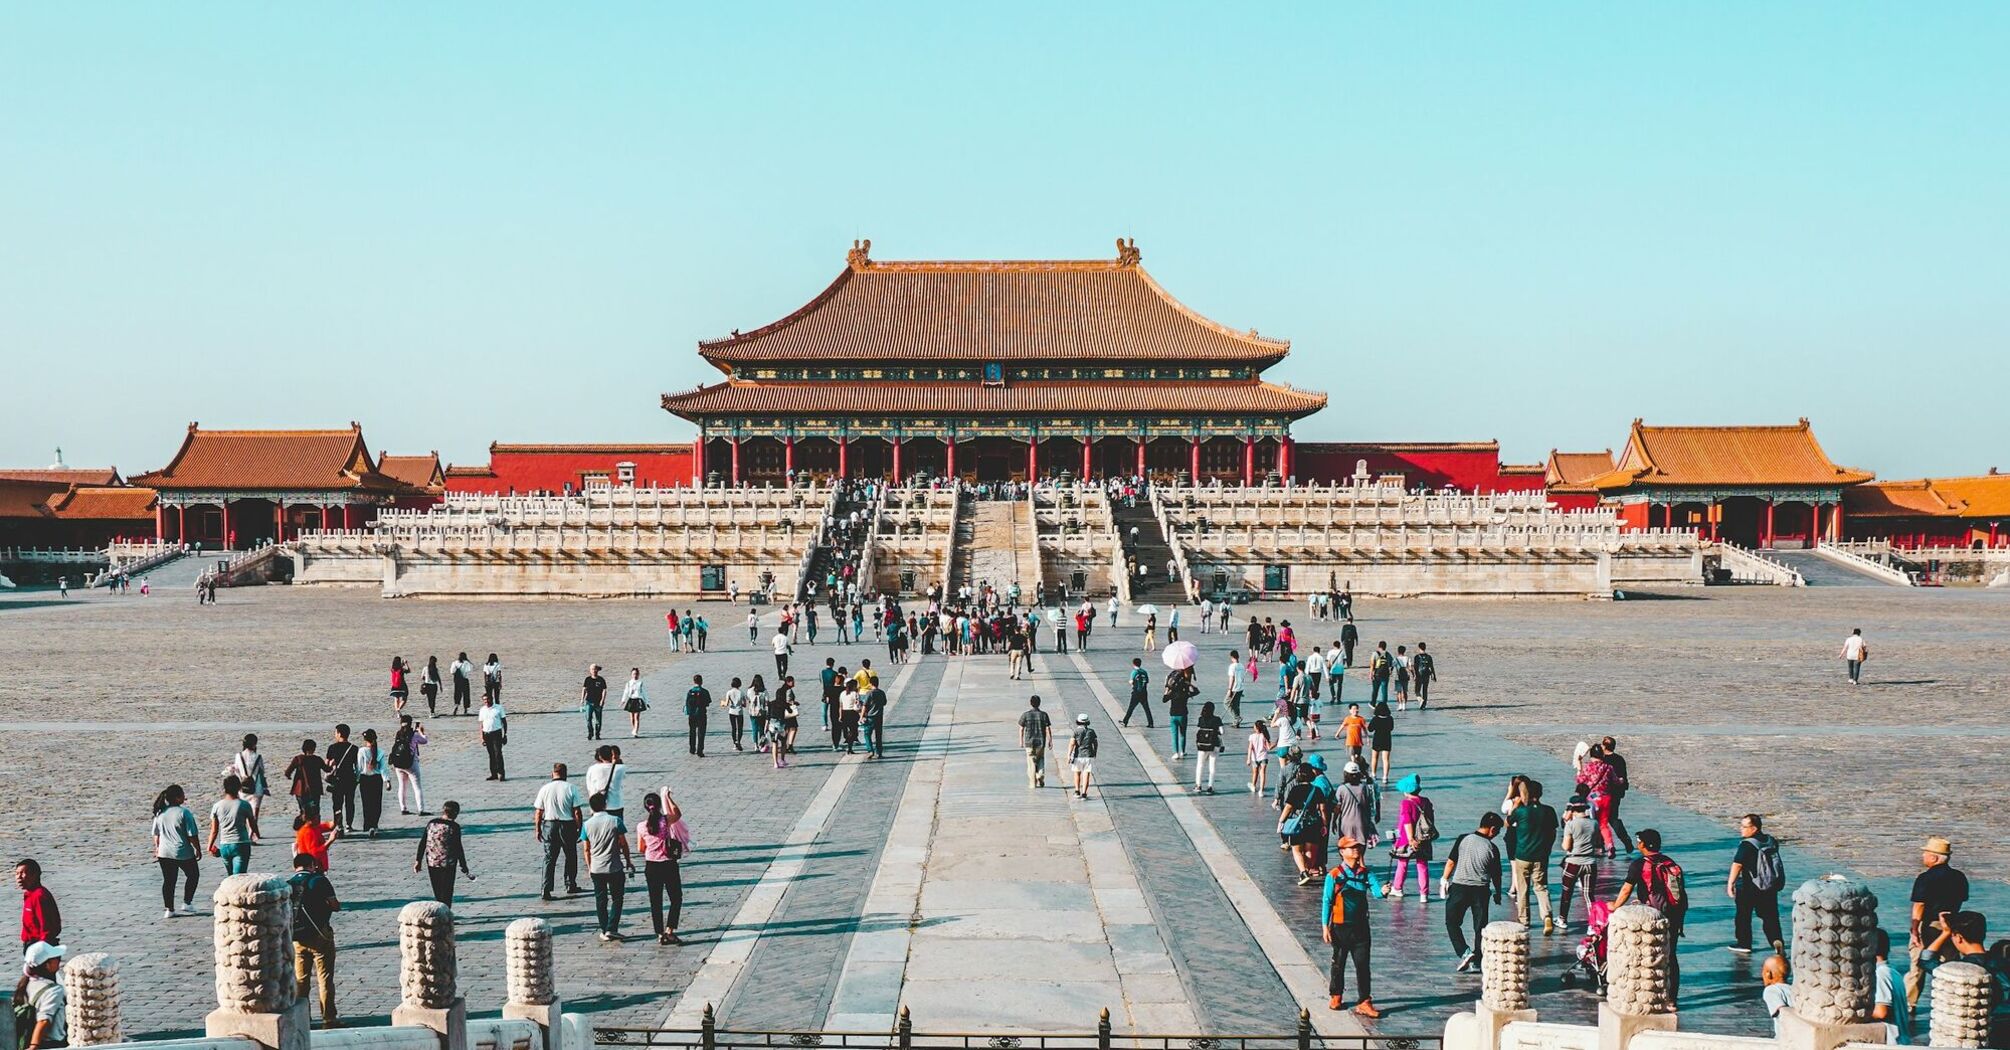 Tourists visiting a historic Forbidden City in China